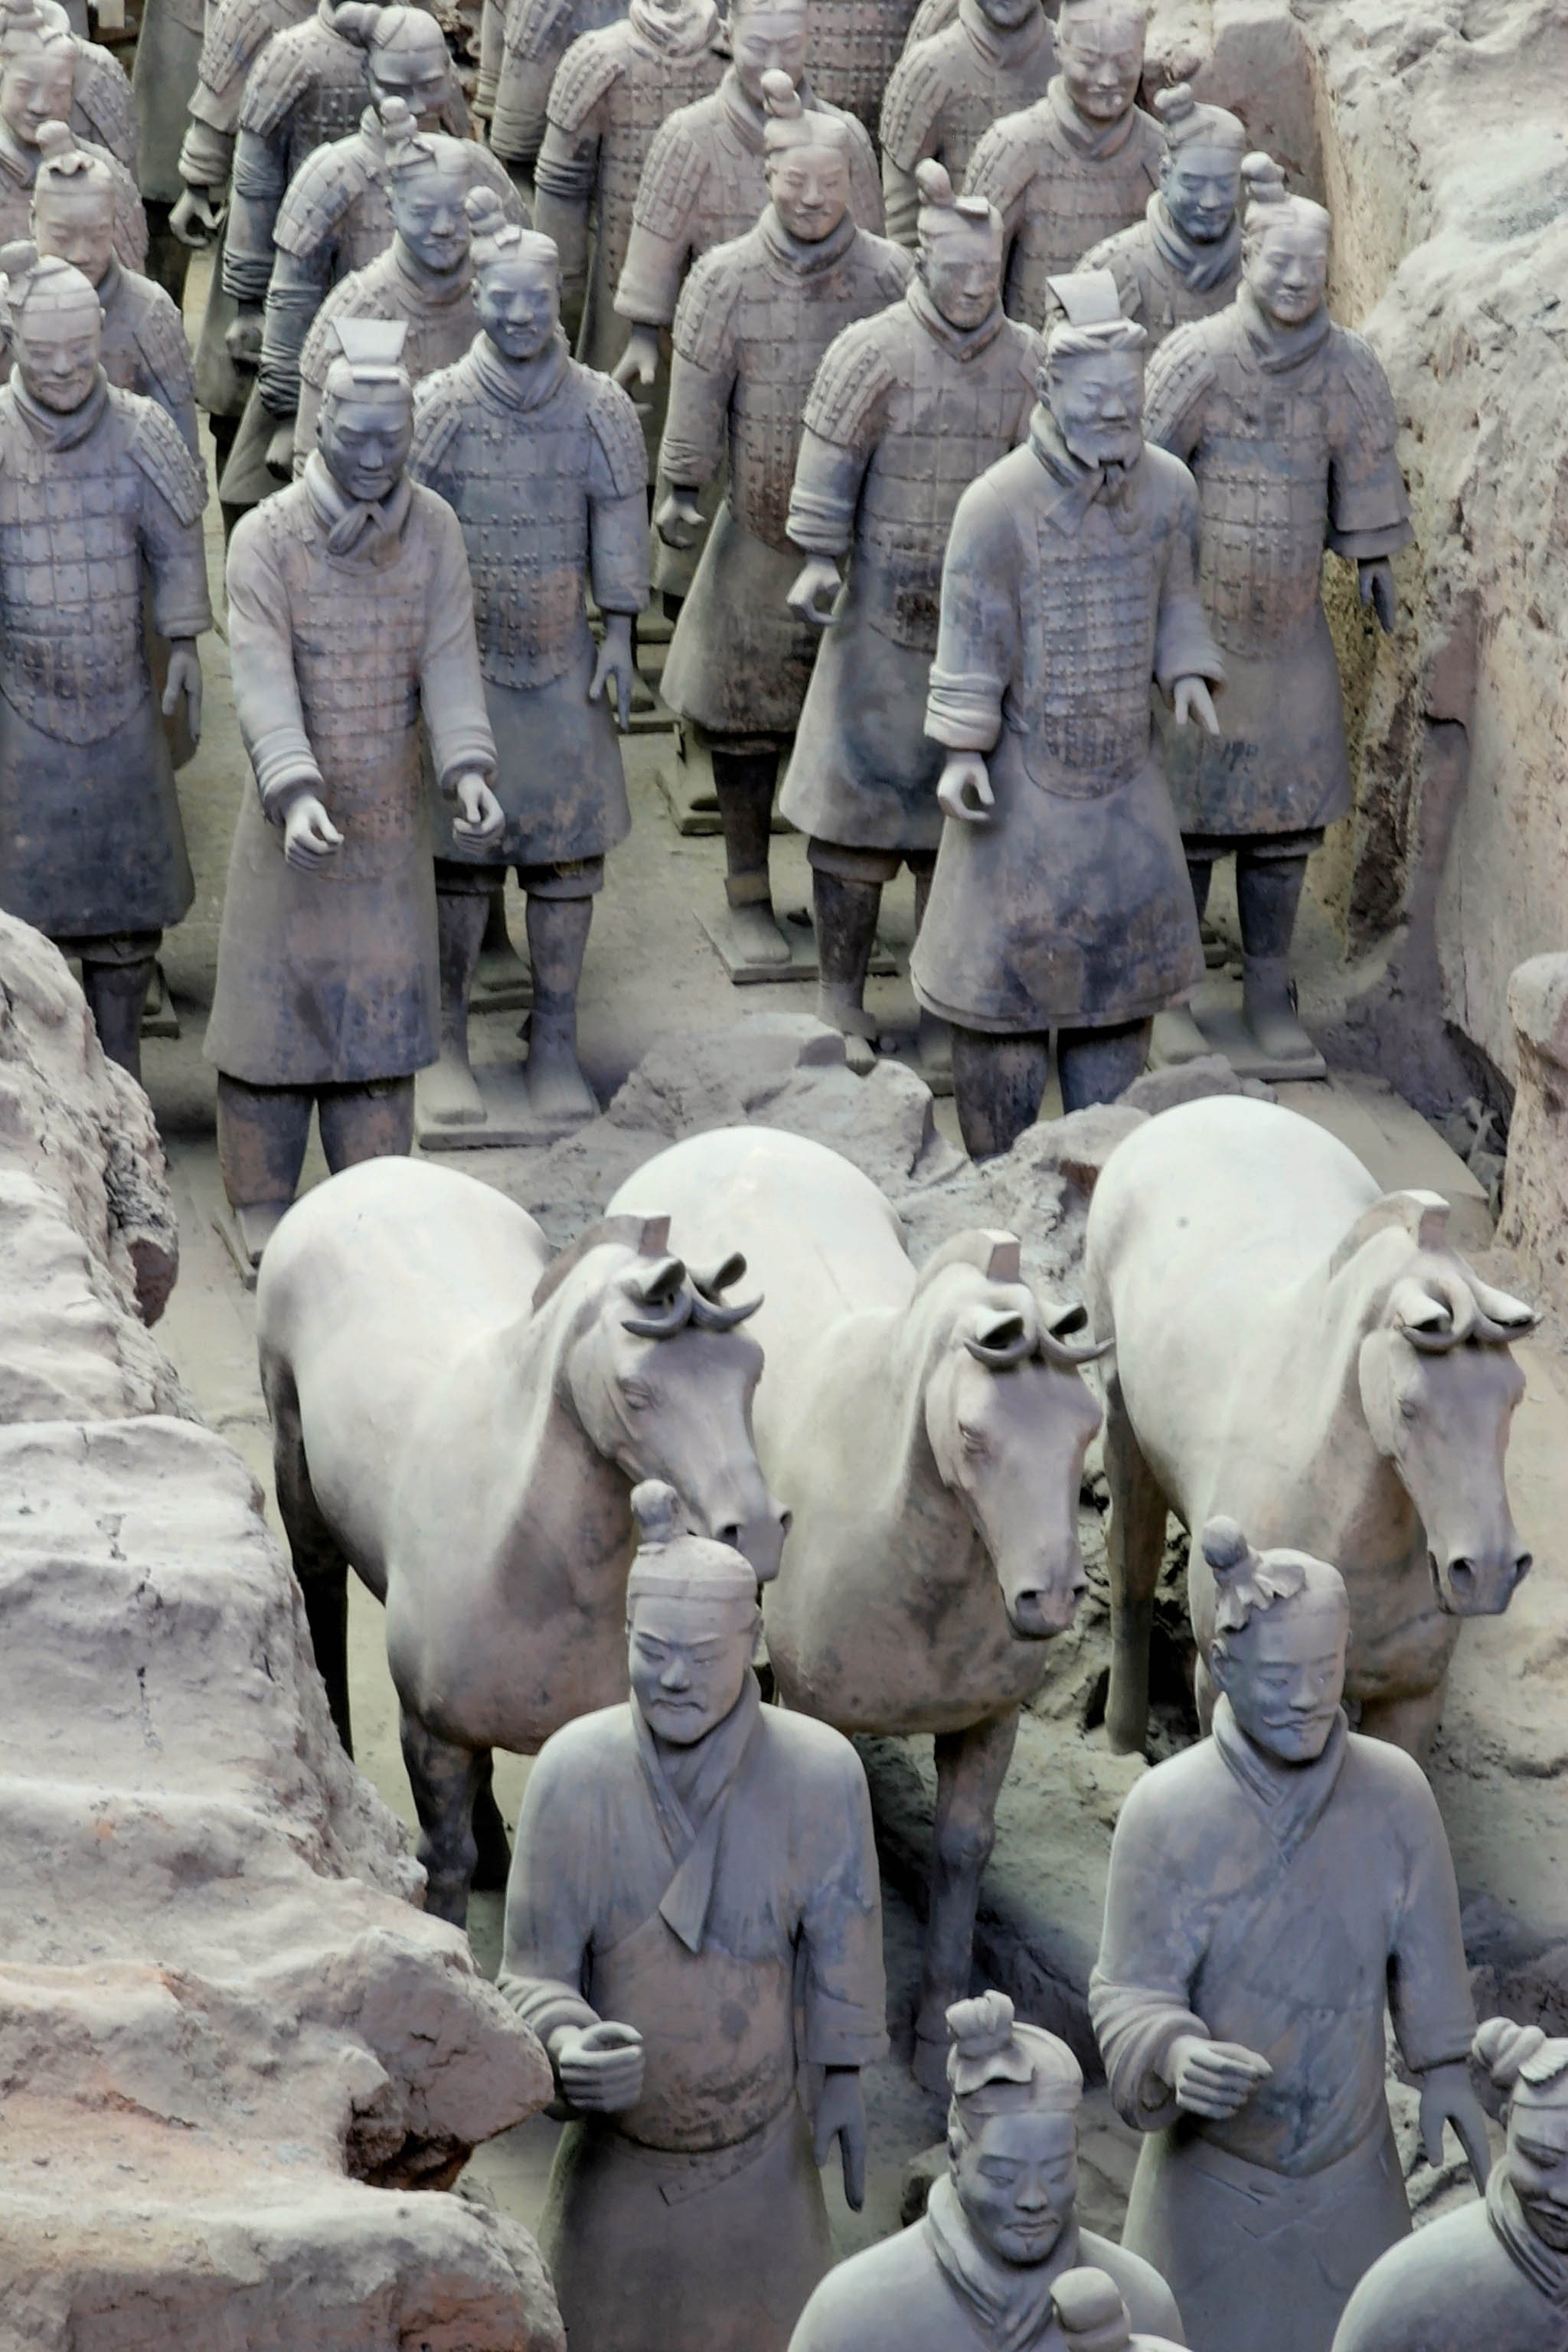 terracotta army statues